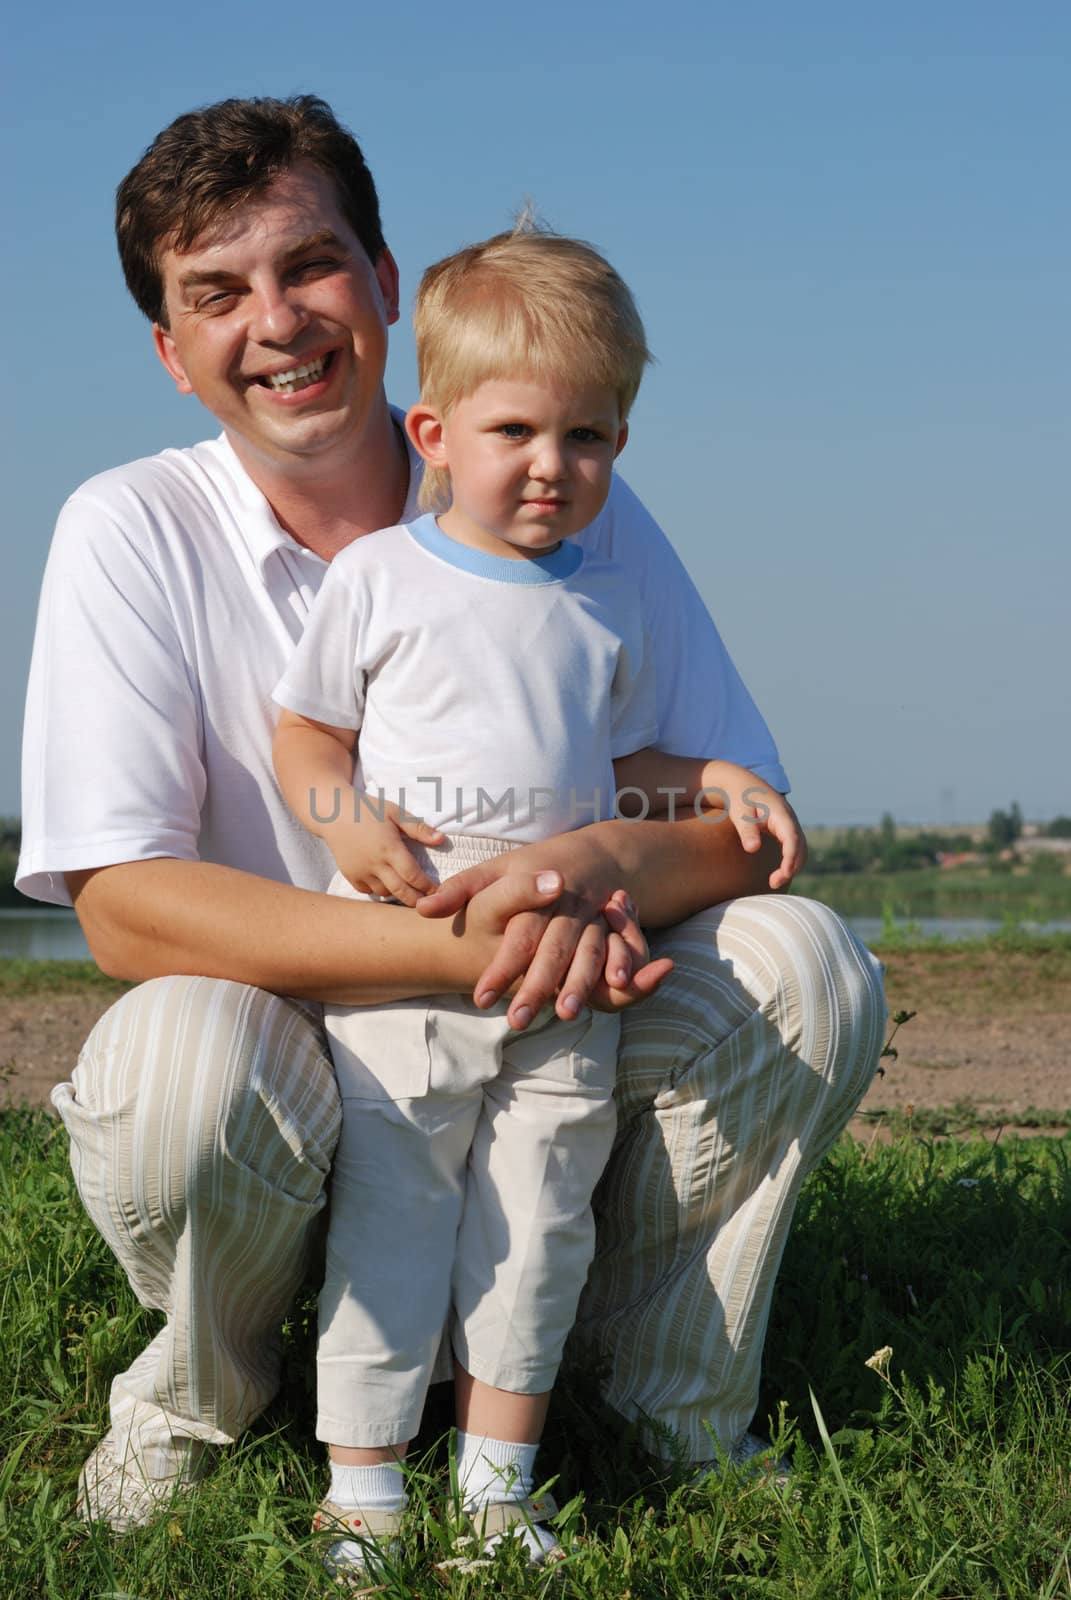 The father and son. Happy people on a meadow with the clear blue sky